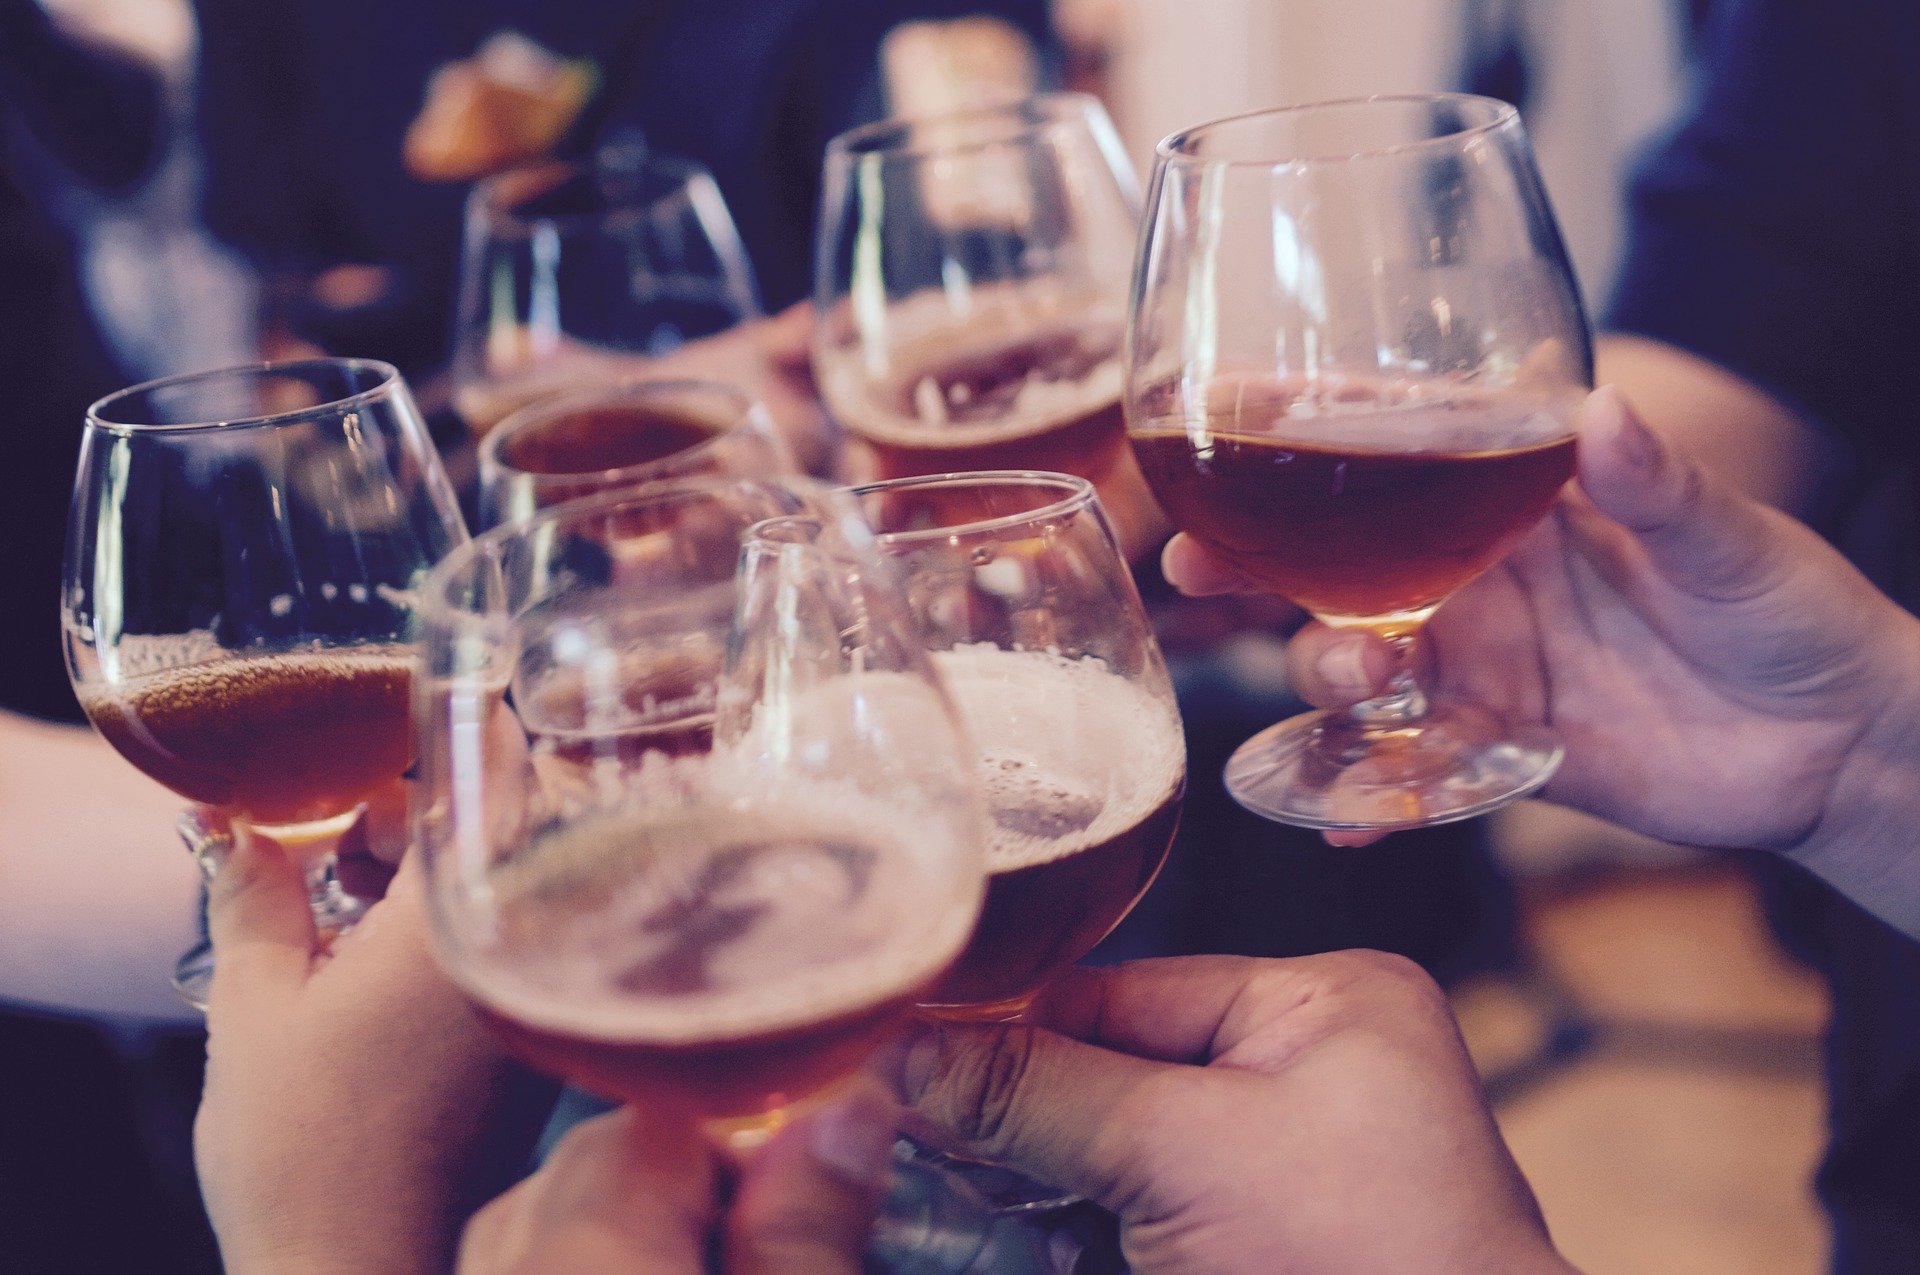 NEWS | When can I visit the pub with my friends? – FULL DETAILS